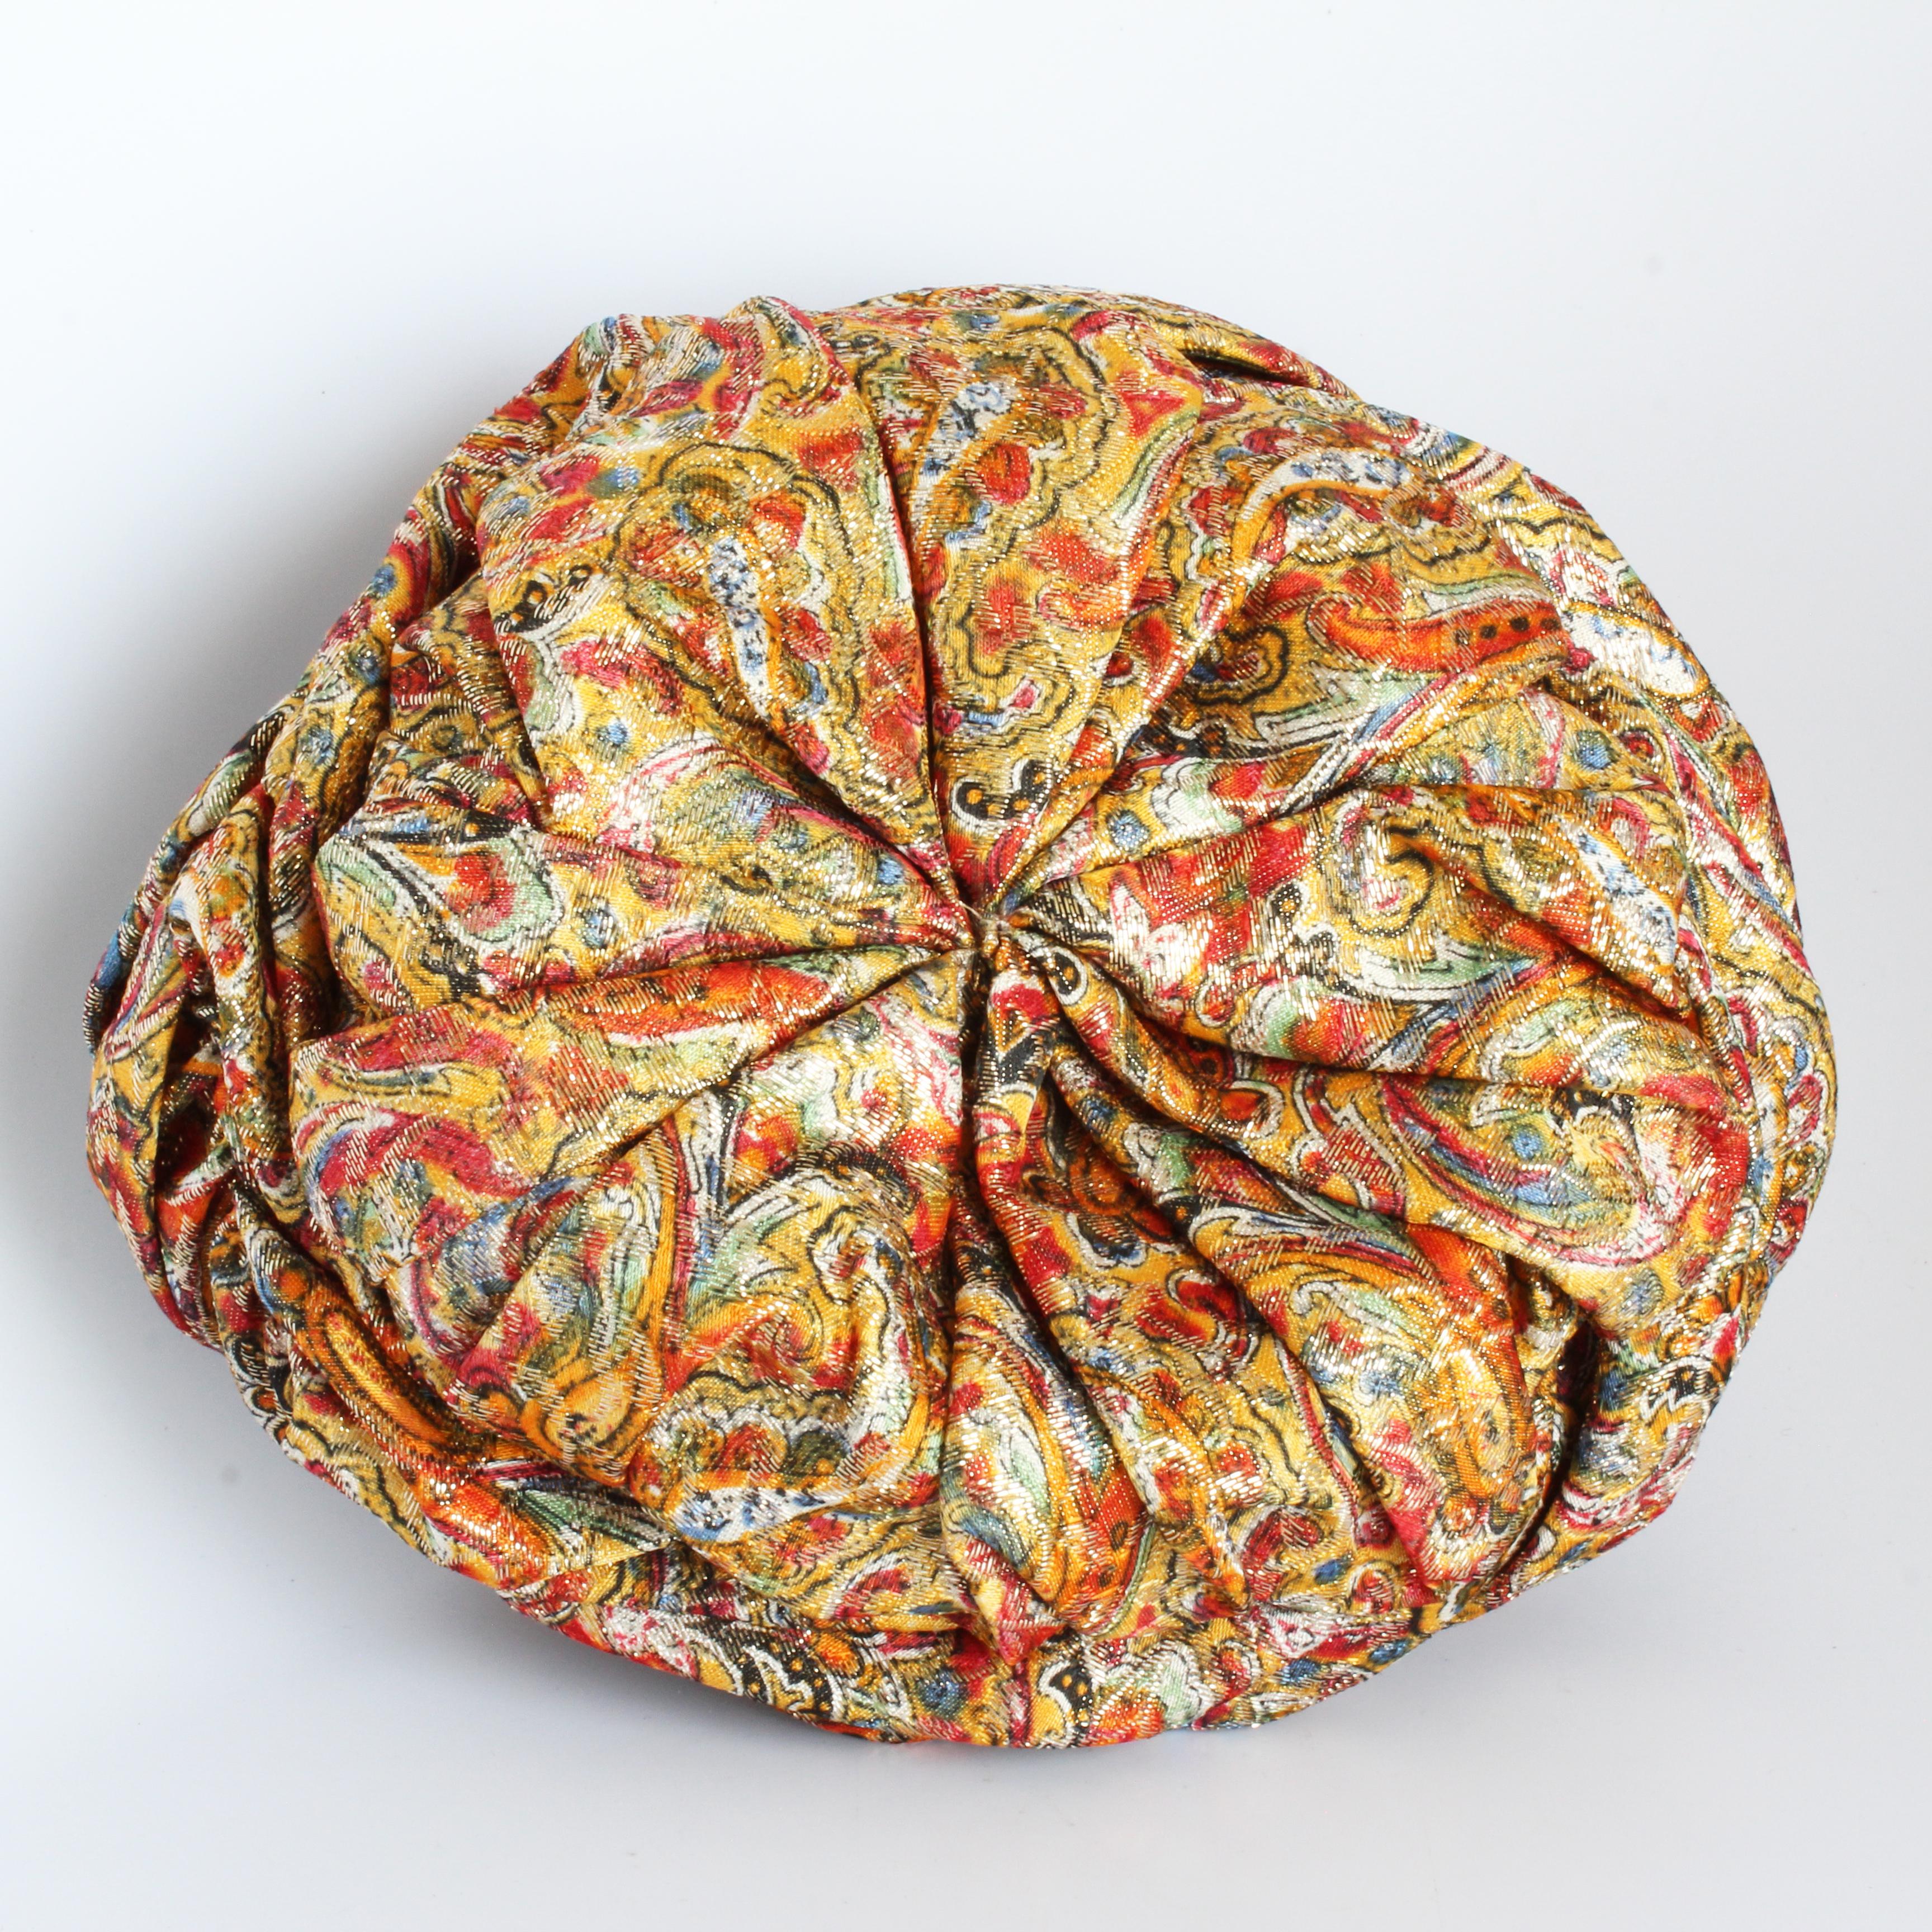 1950s Turban Hat Metallic Paisley Colorful by Marshall Field & Company Rare  For Sale 6